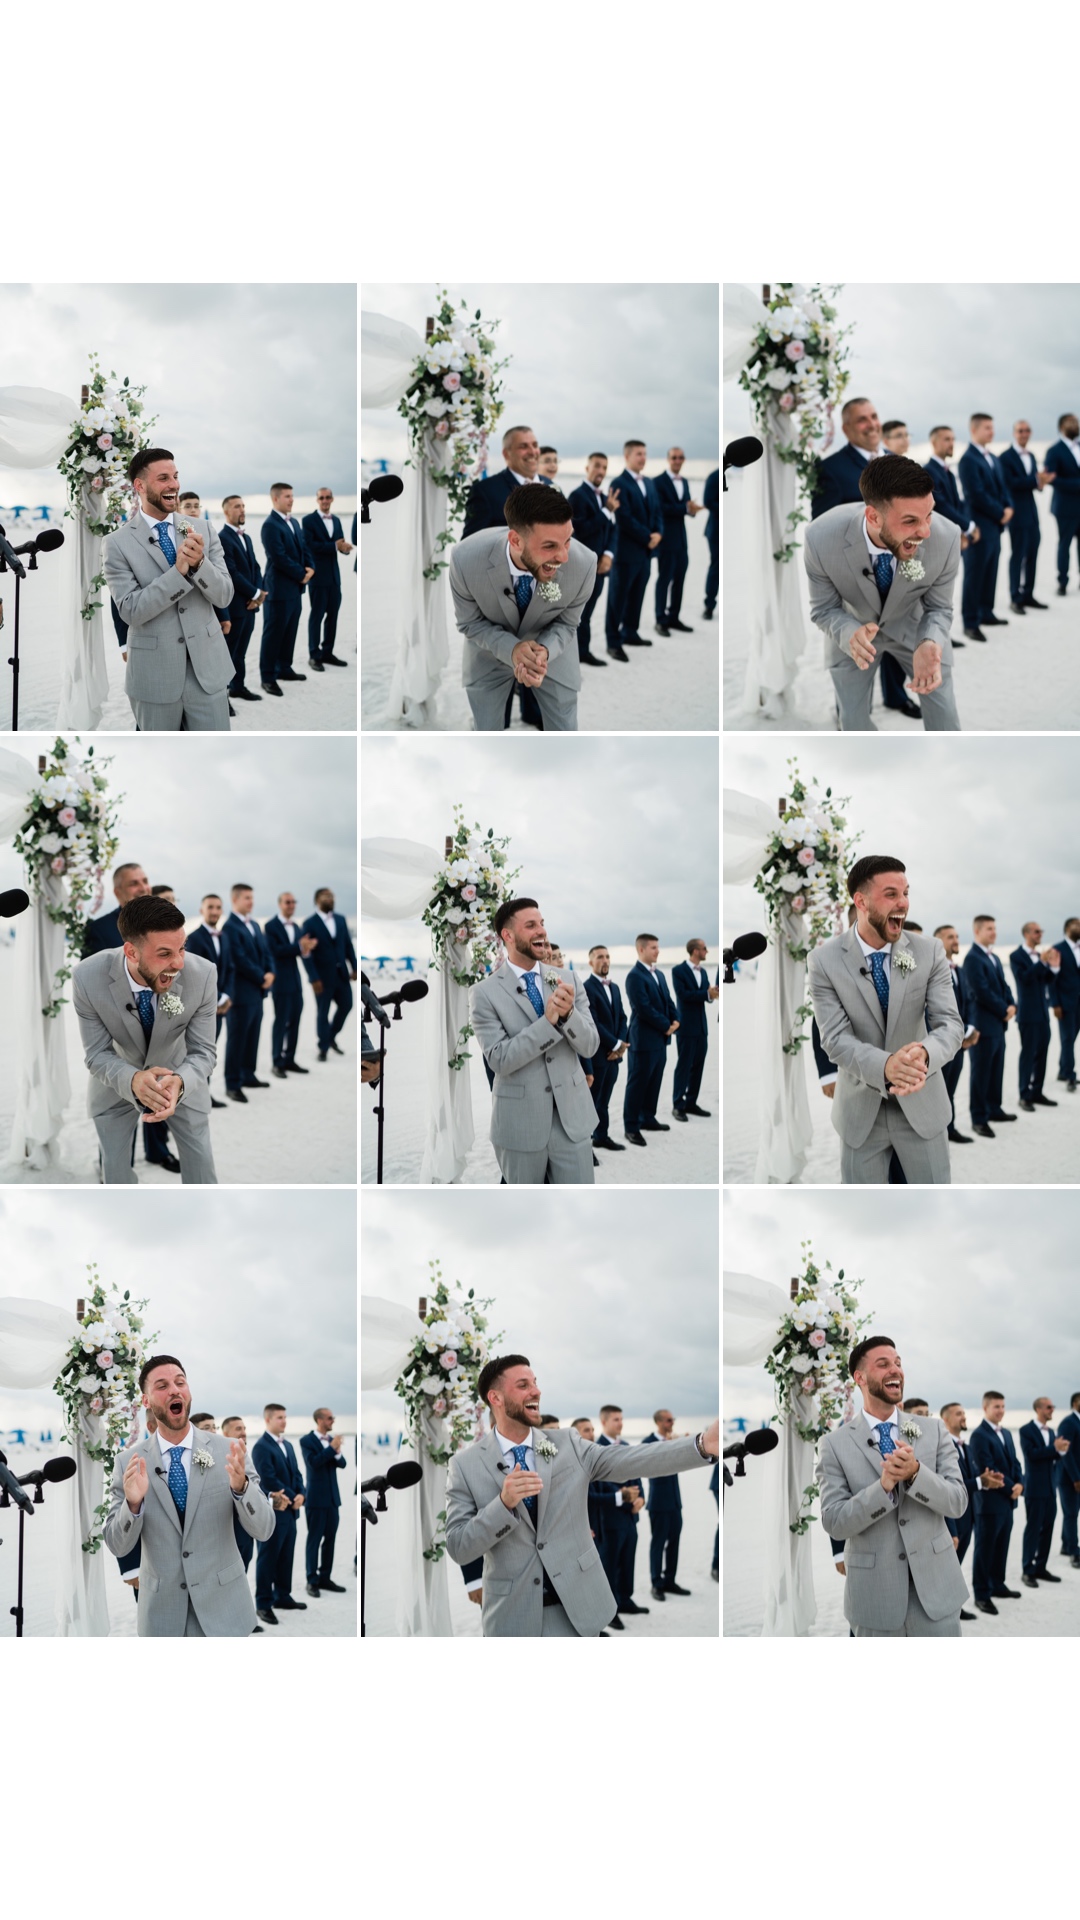 Groom reaction as he watches his bride walk down the aisle